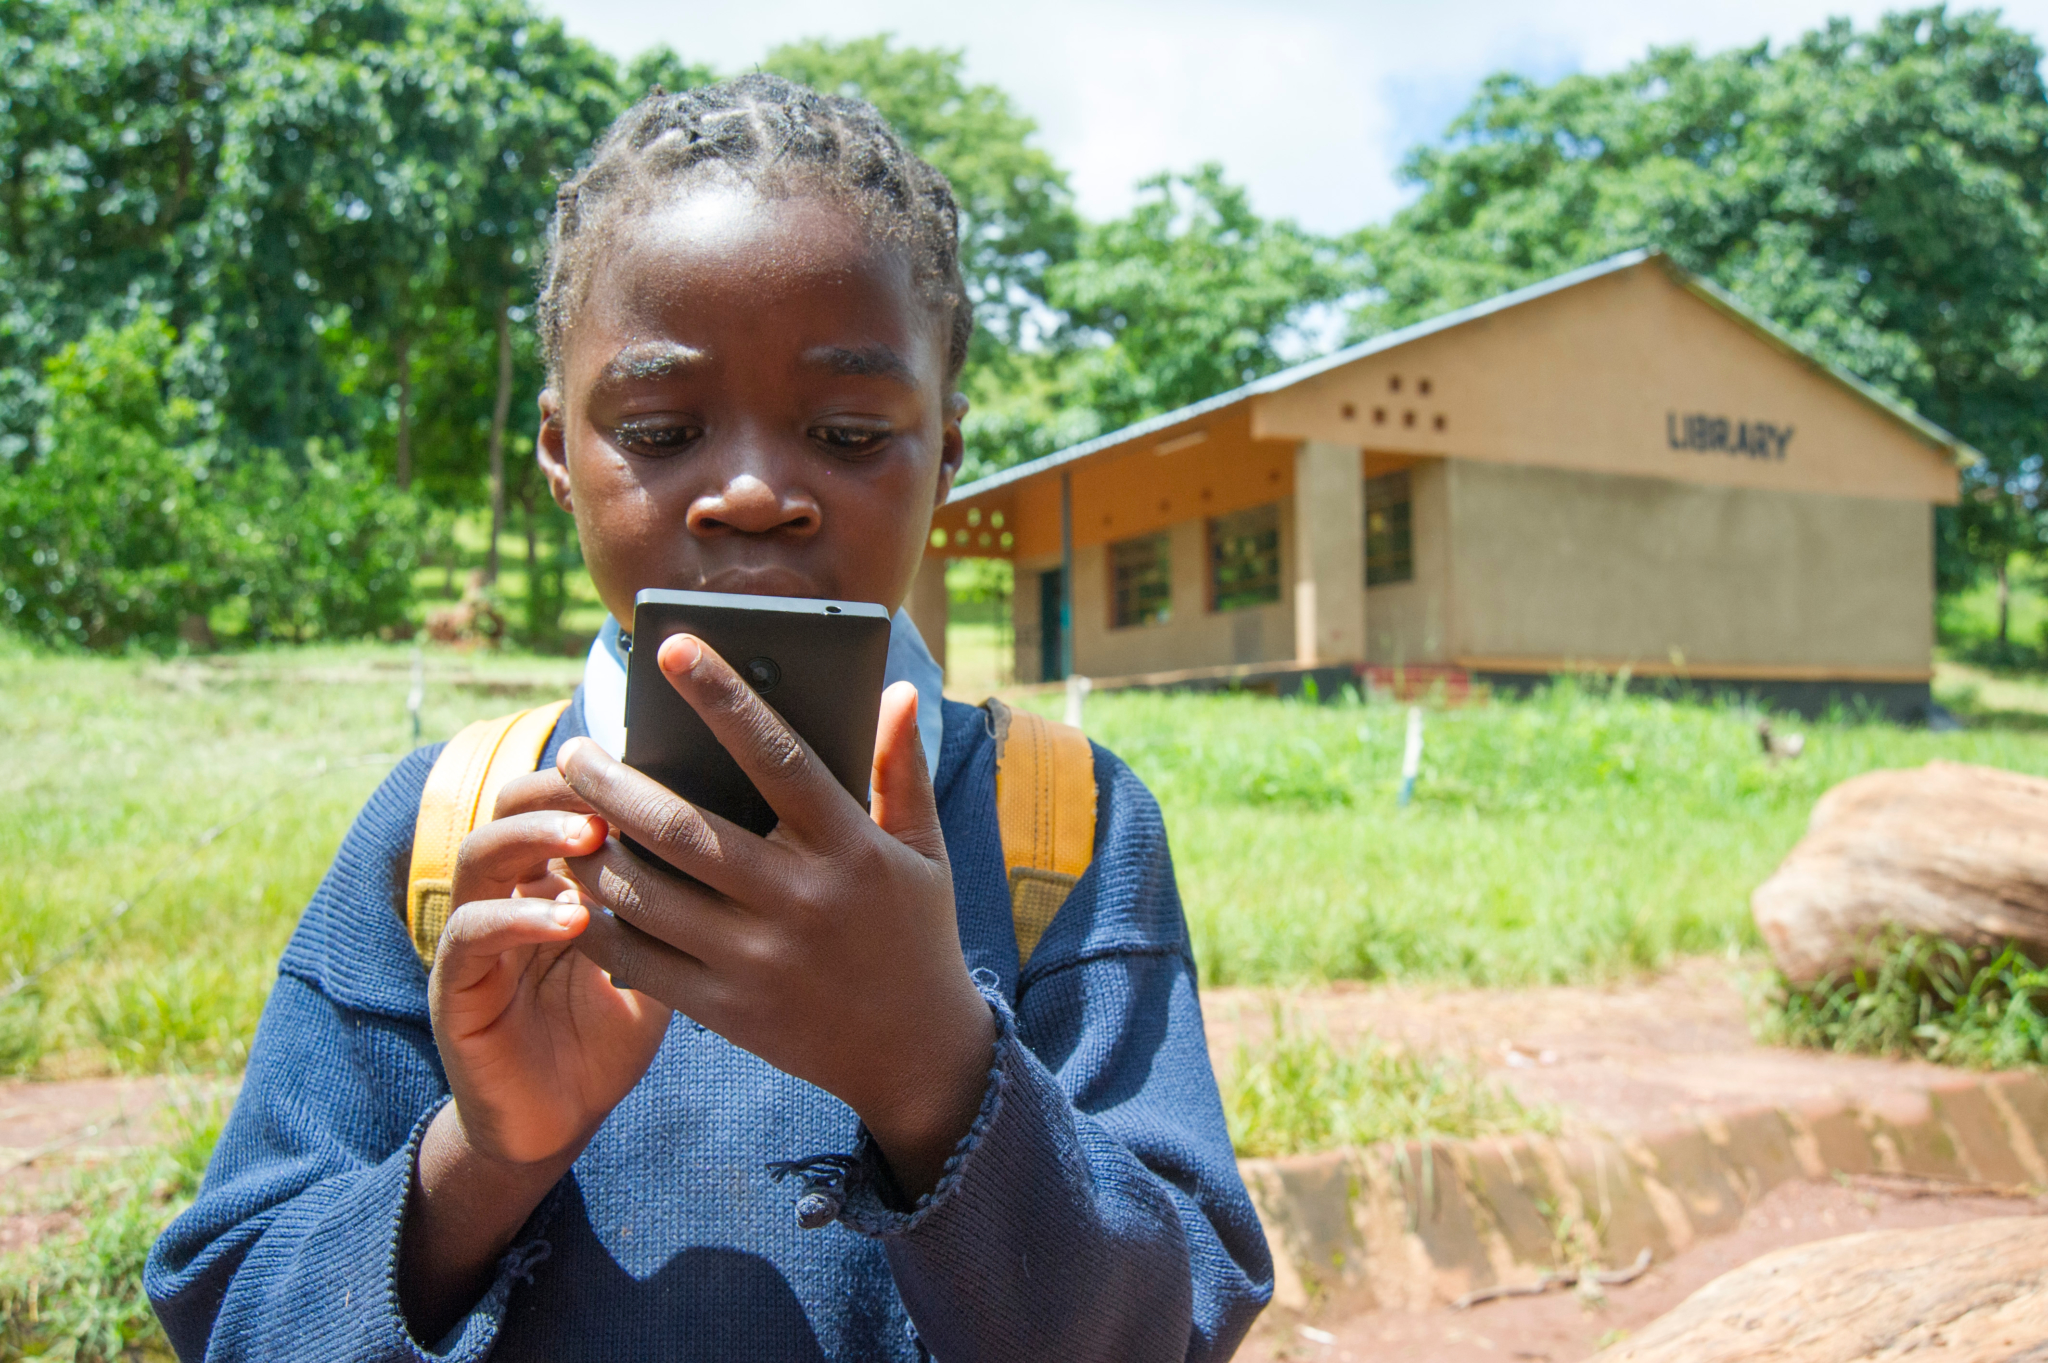 A youth using a mobile phone on the grounds of the Katopola School just outside of Chipata - one of the more than 1,100 schools taking part in the Read to Succeed project.